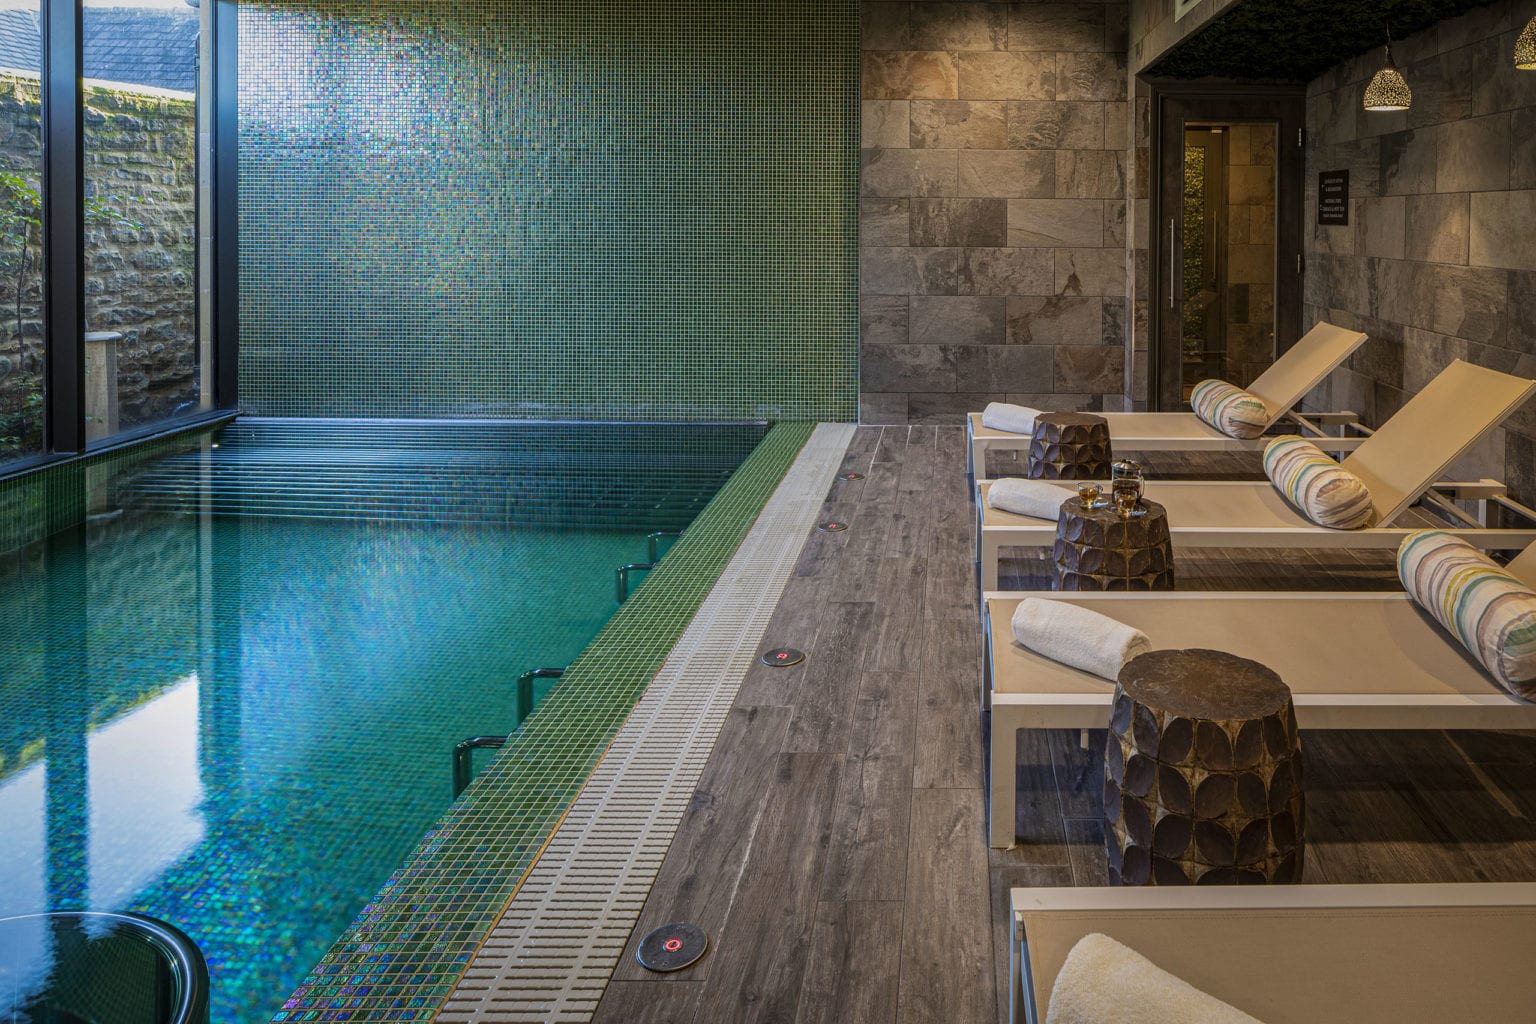 Hydrotherapy pool at the luxury spa in Swinton Country Club near Harrogate and Ripon in North Yorkshire